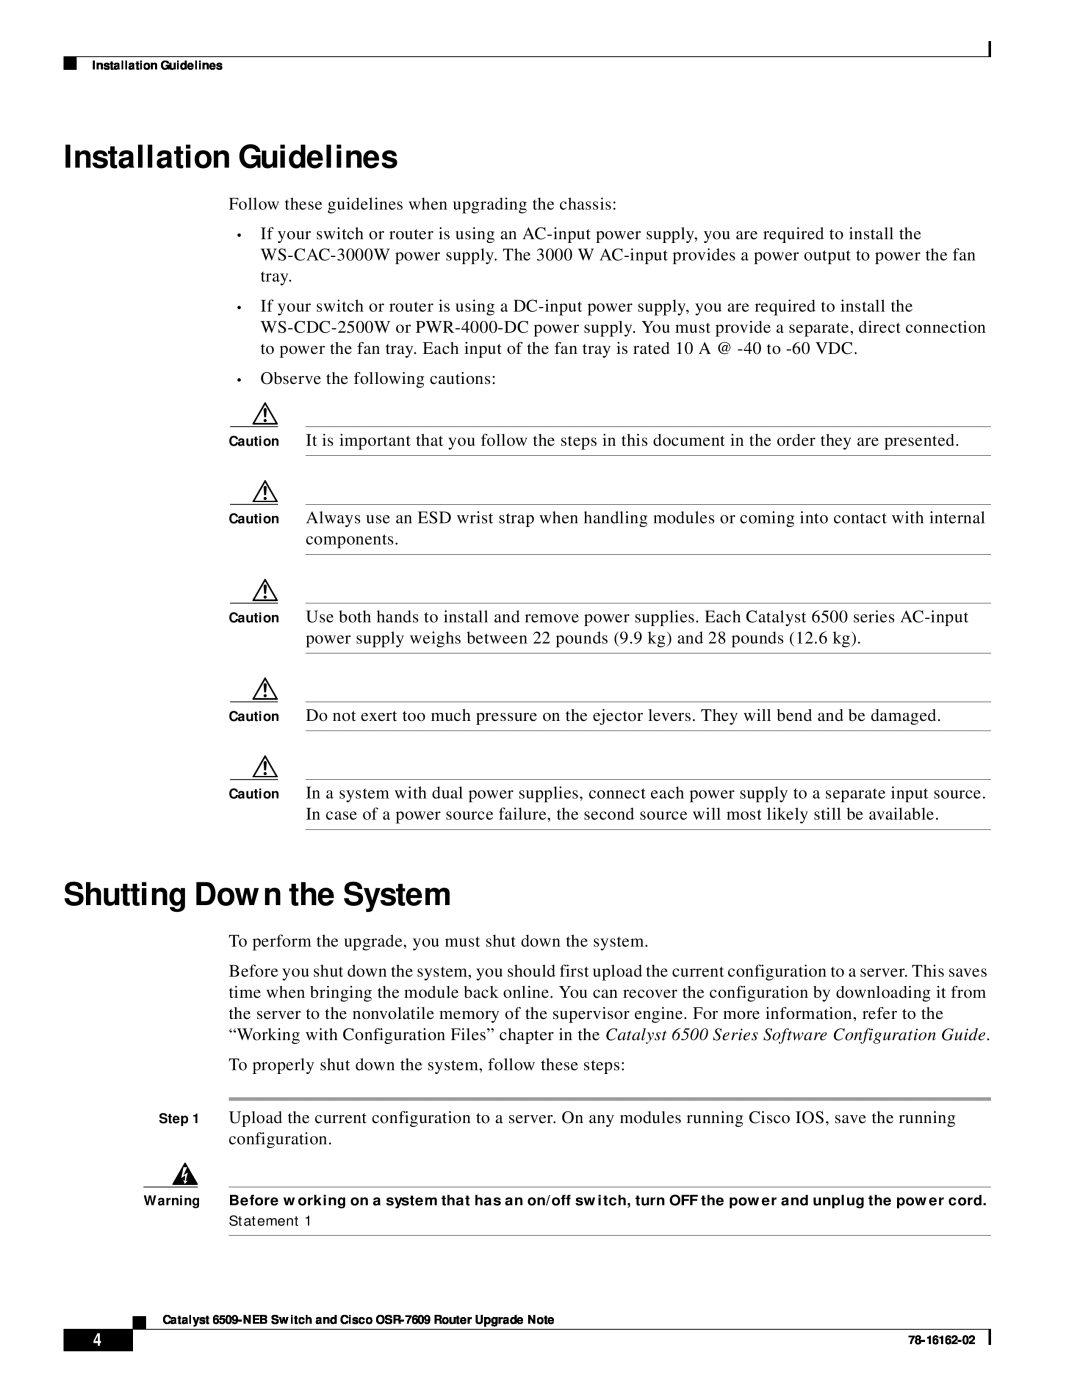 Cisco Systems 6509-NEB, OSR-7609 manual Installation Guidelines, Shutting Down the System, Statement 